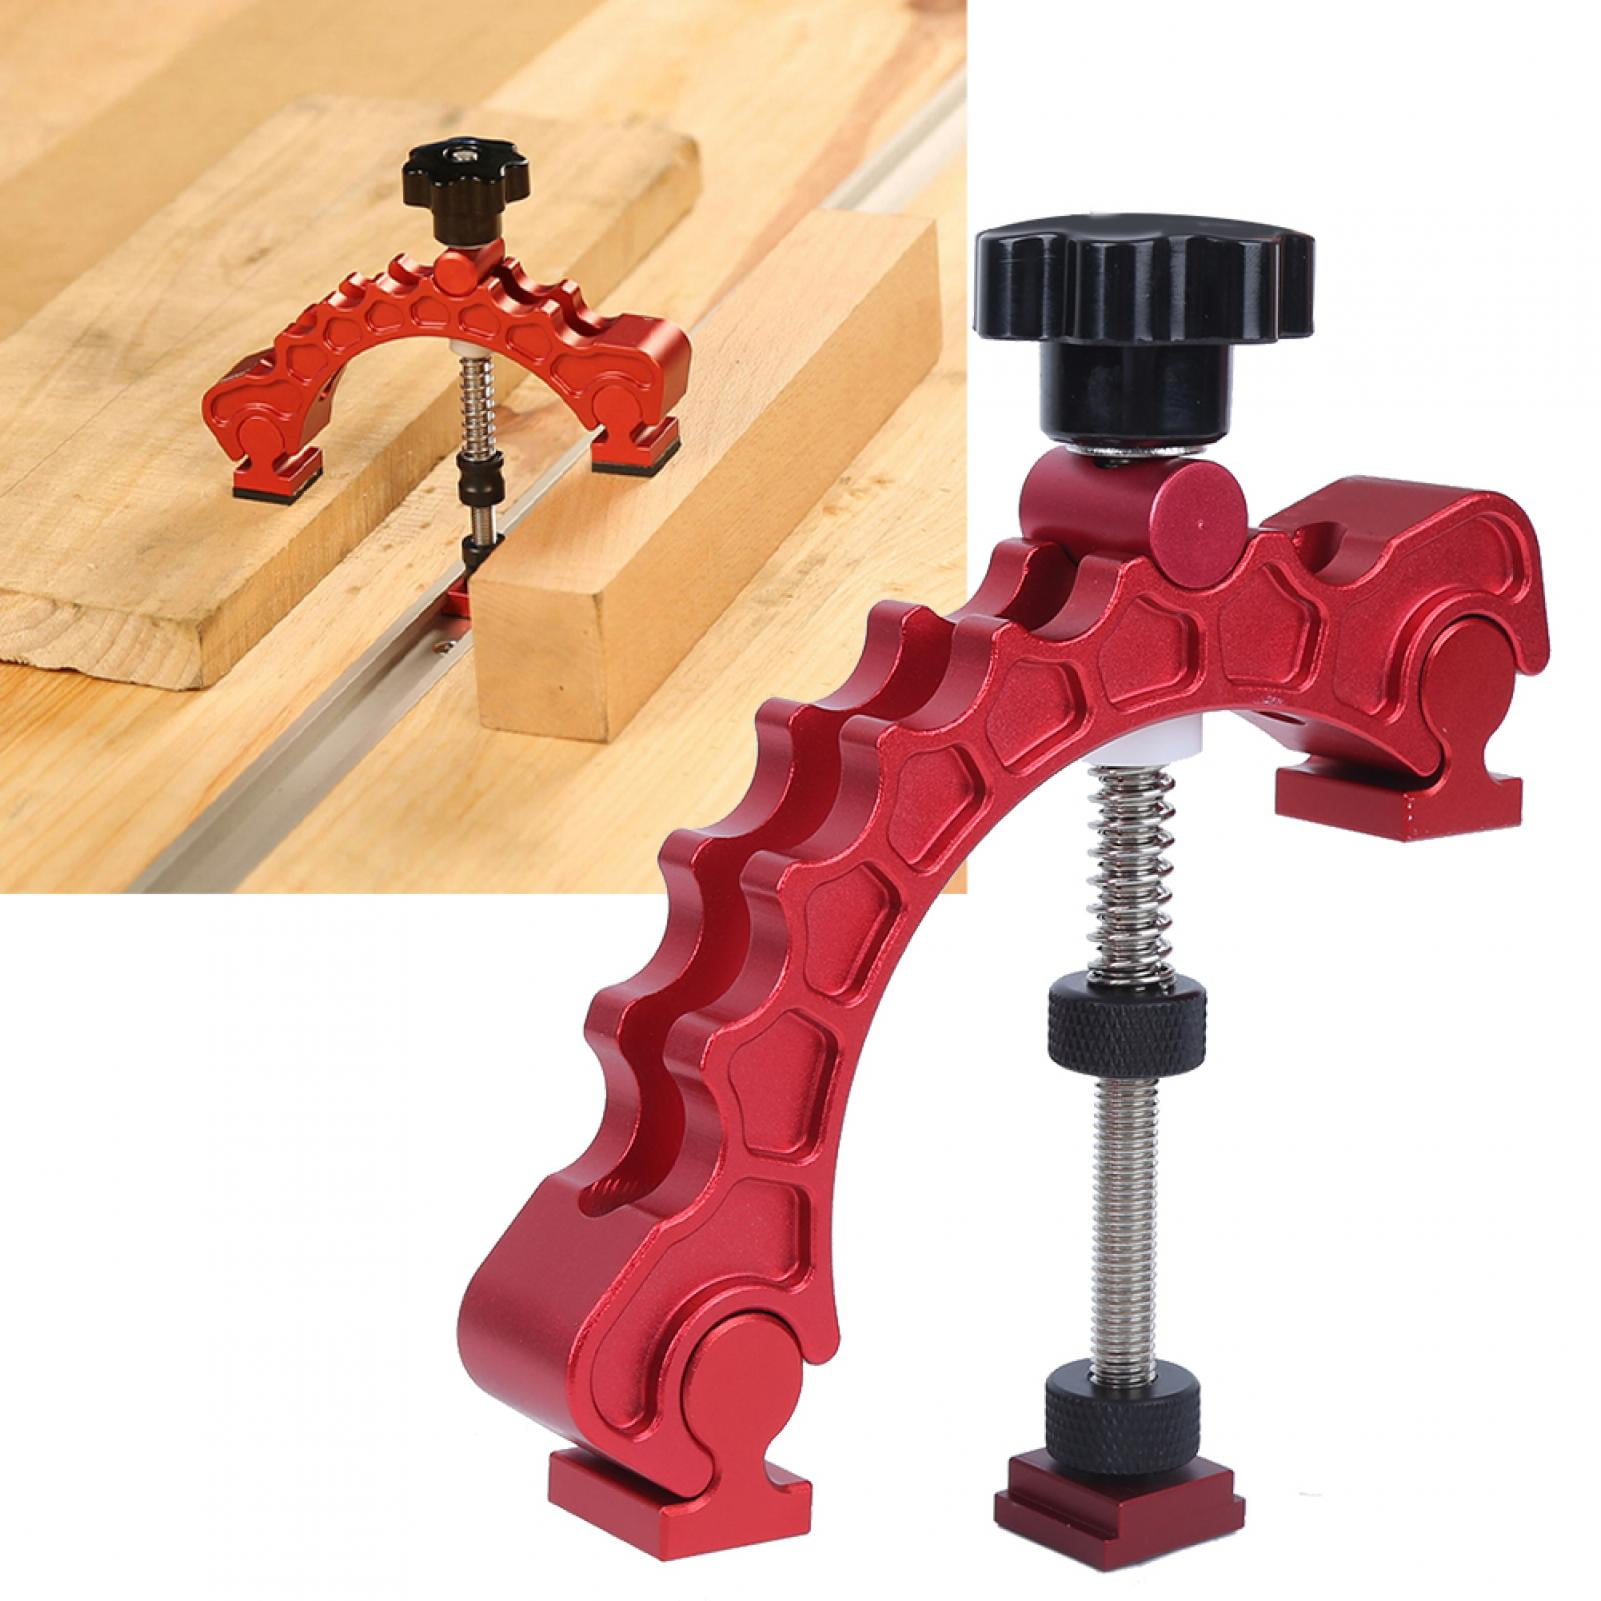 T Track Accessories Woodworking Adjustable Press Plate Clamp Hold Down Clamps Crimping Circlip